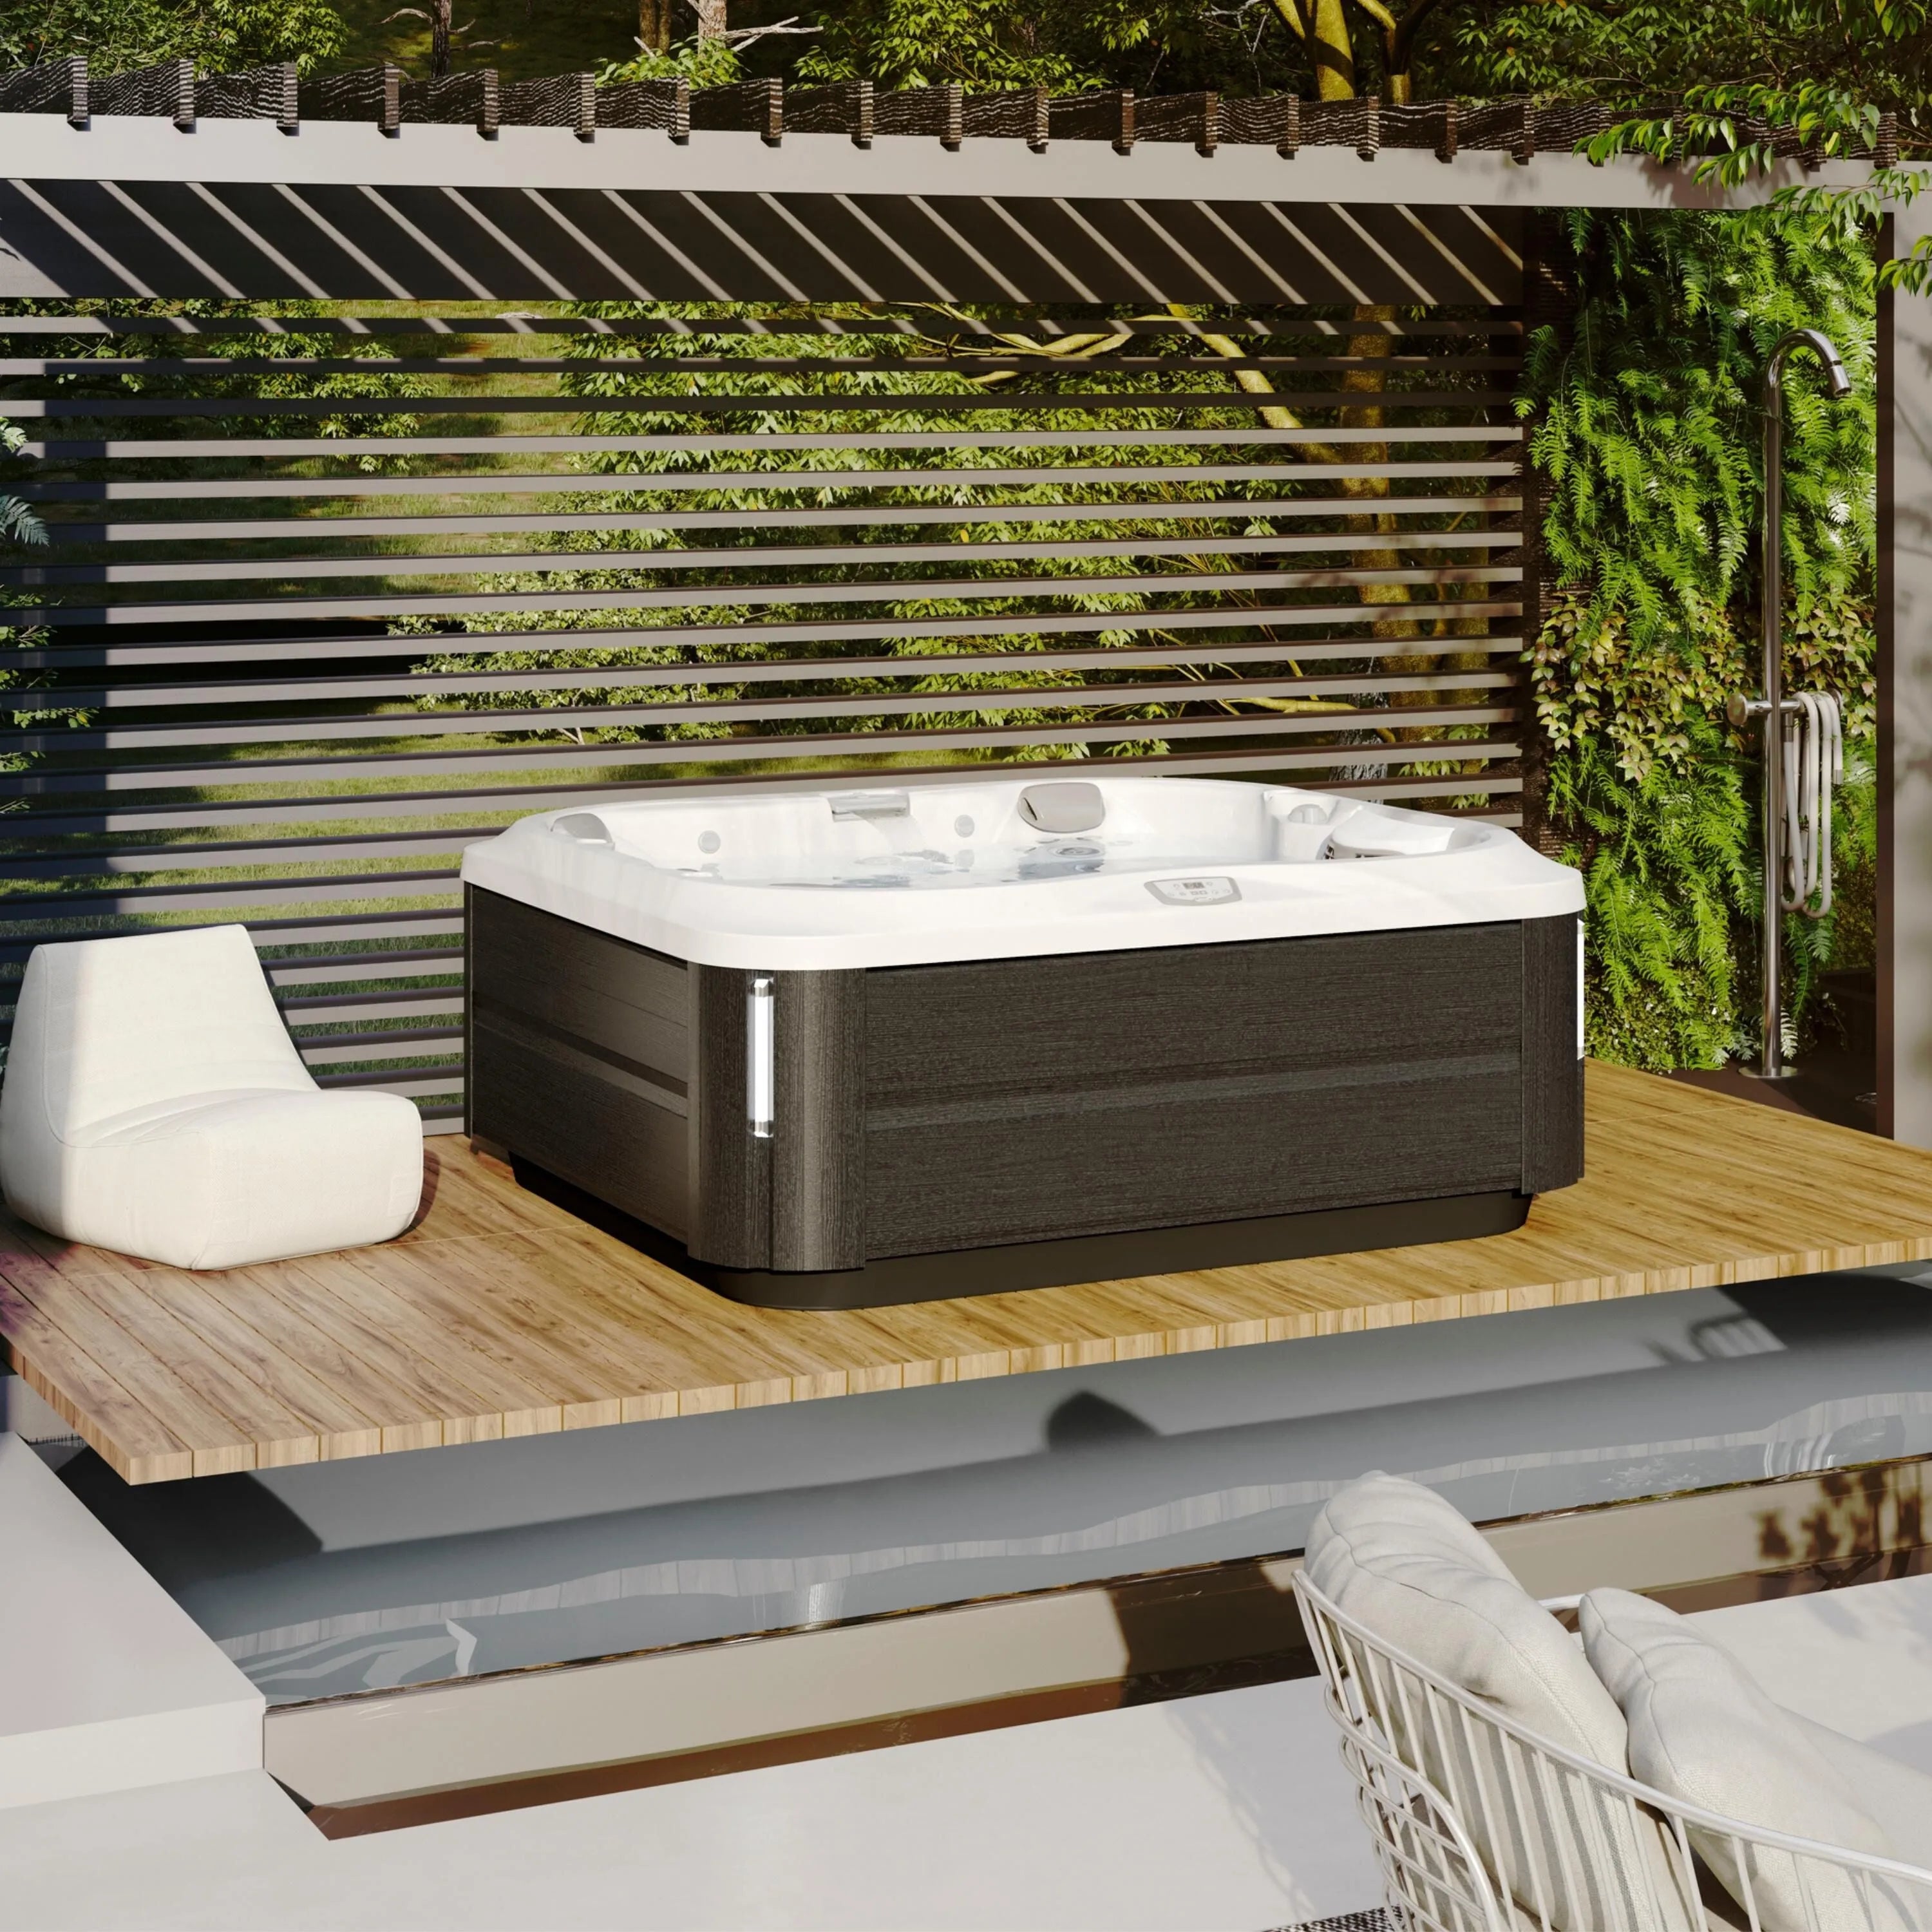 A modern outdoor deck features a square Jacuzzi J-355 HOT TUB WITH COMFORT LOUNGE SEATING & COOL DOWN SEAT with a white interior and dark wood exterior, enhanced by hydrotherapy jets. The deck has wooden slats on one side, greenery on the walls, a cozy white chair, and a rain shower fixture. The elegant setup is surrounded by a lush garden.